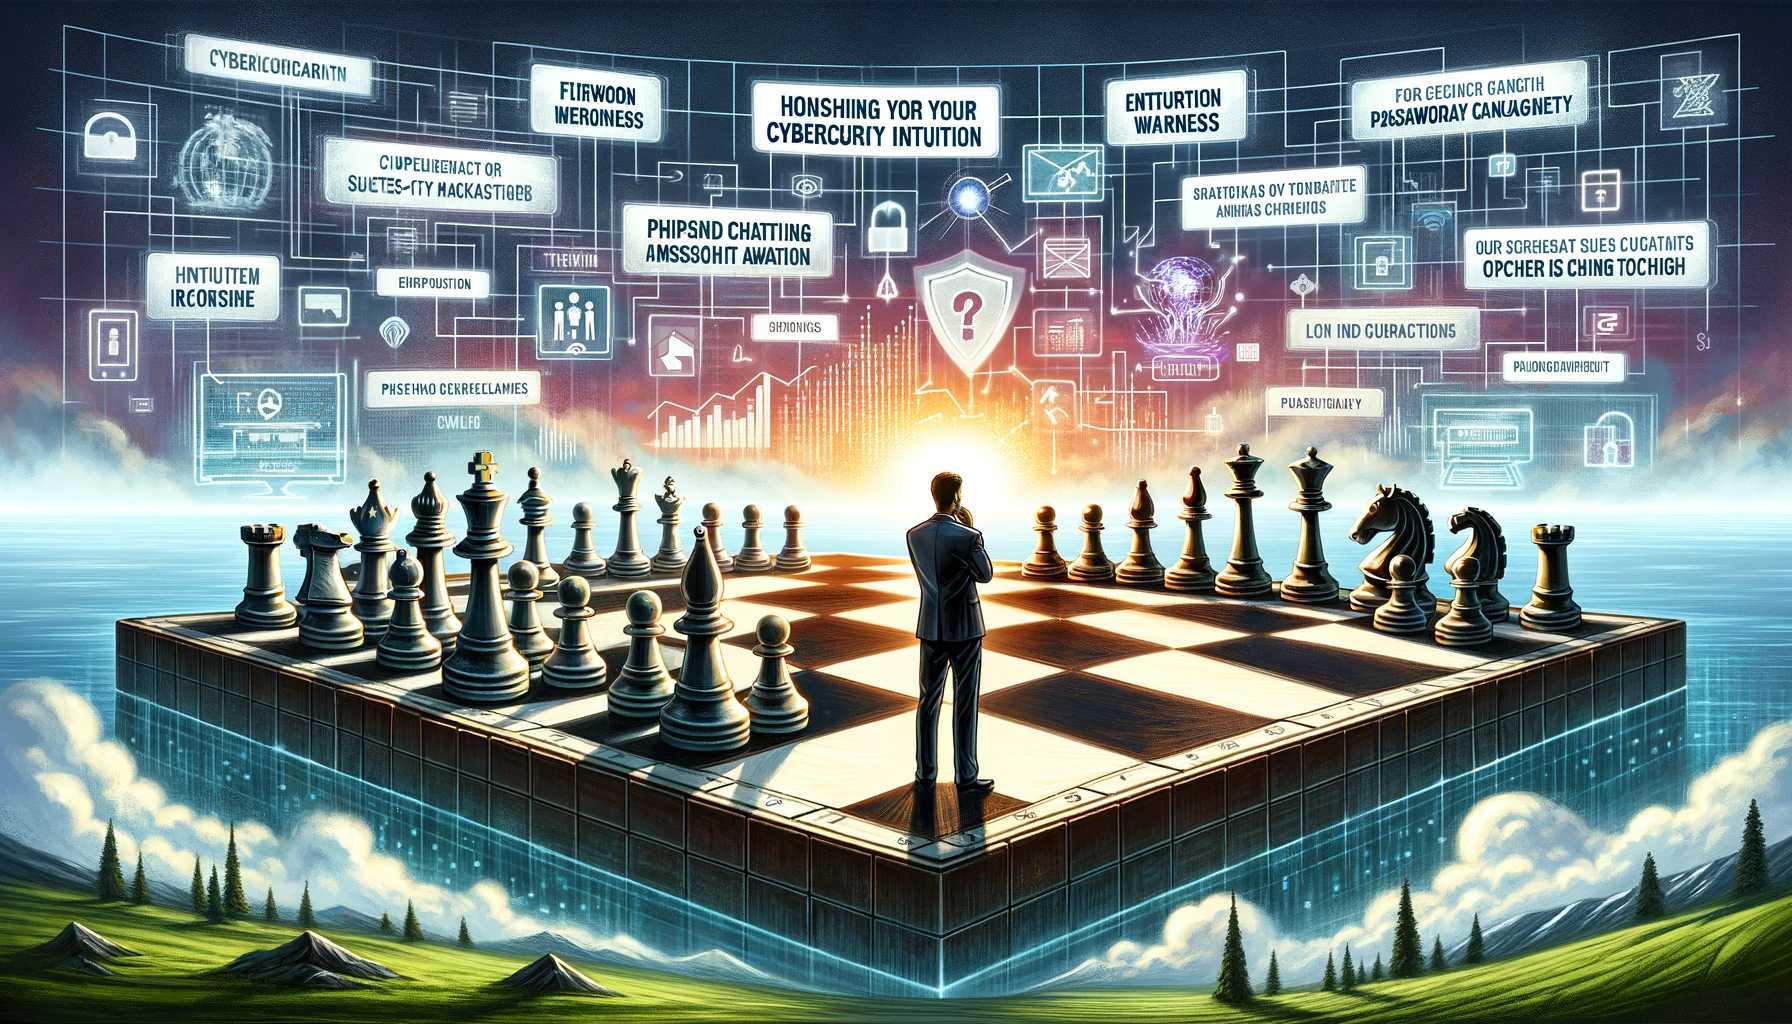 Cybersecurity Chessboard: 20 Tips for Honing Your Cybersecurity Intuition